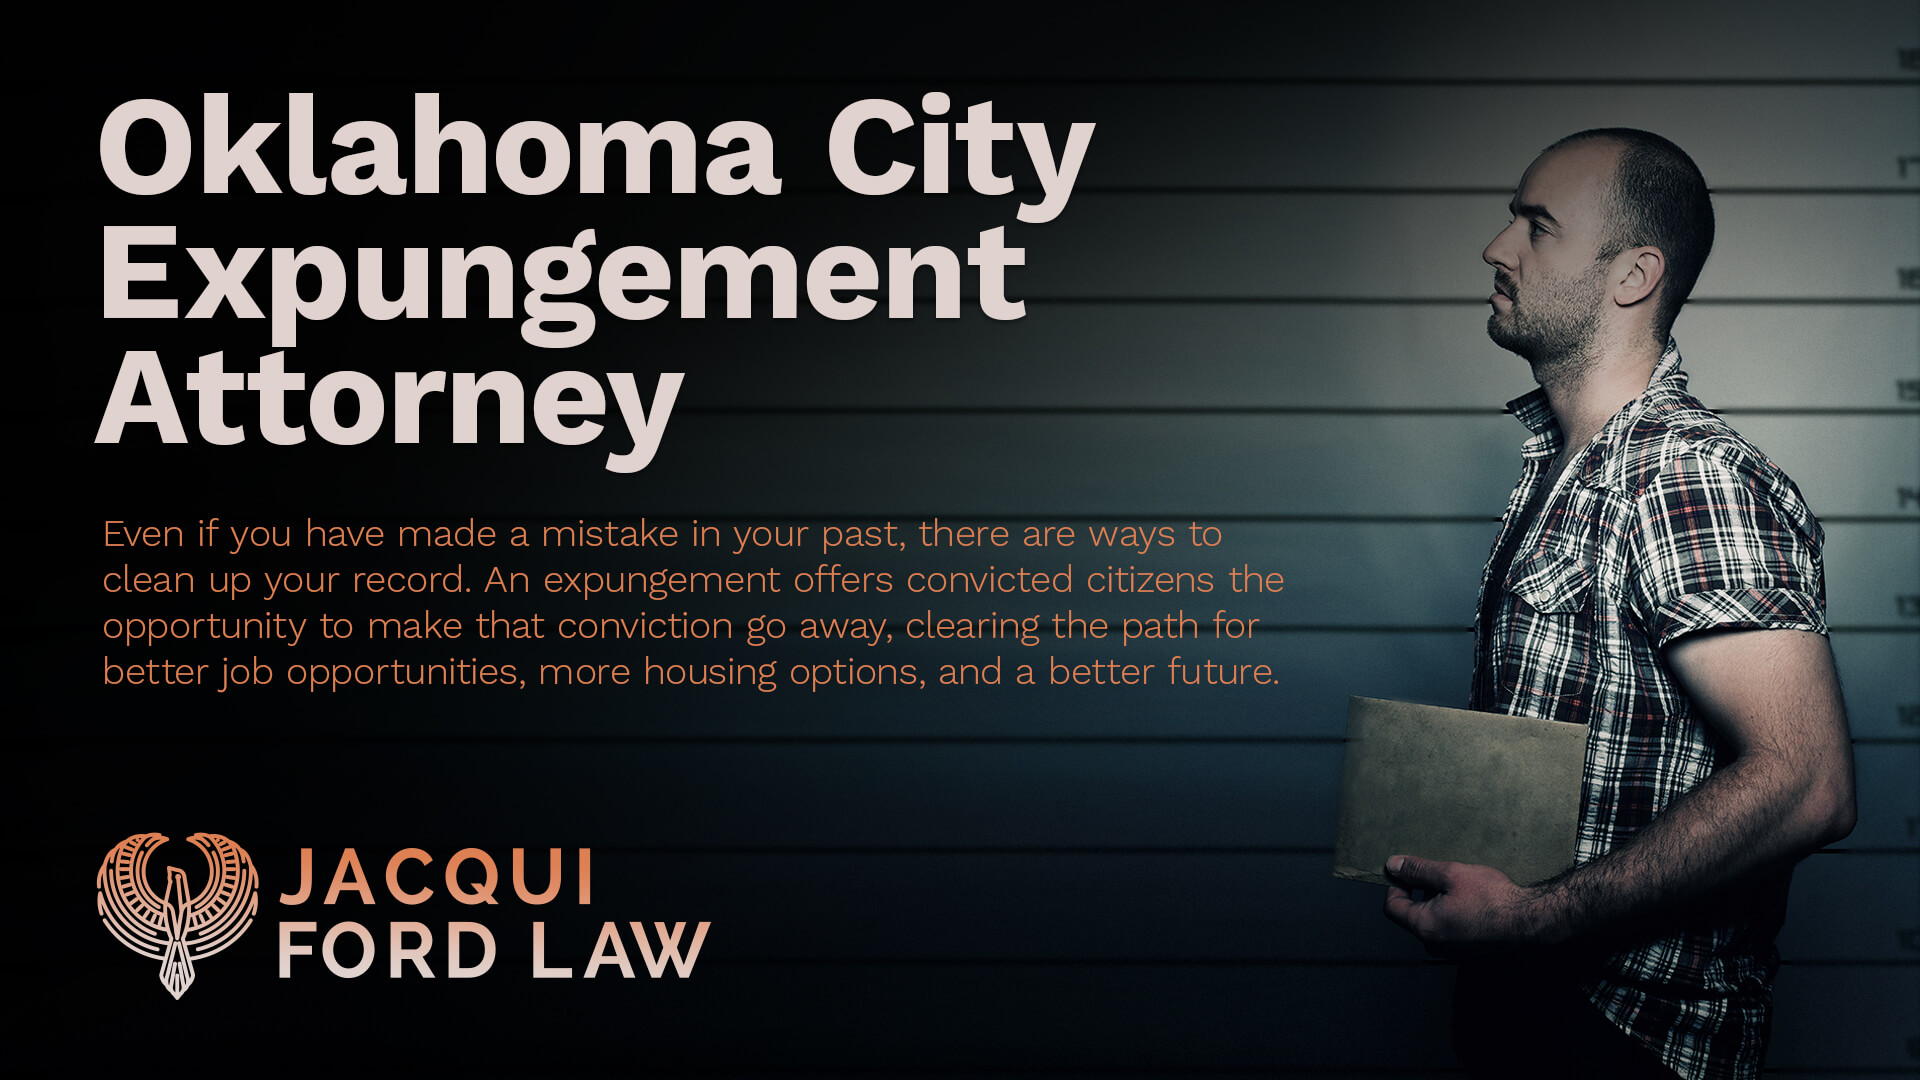 Expungements-Jacqui-Ford-Law-Criminal-Defense-Lawyer-Oklahoma-City-Feat-PP